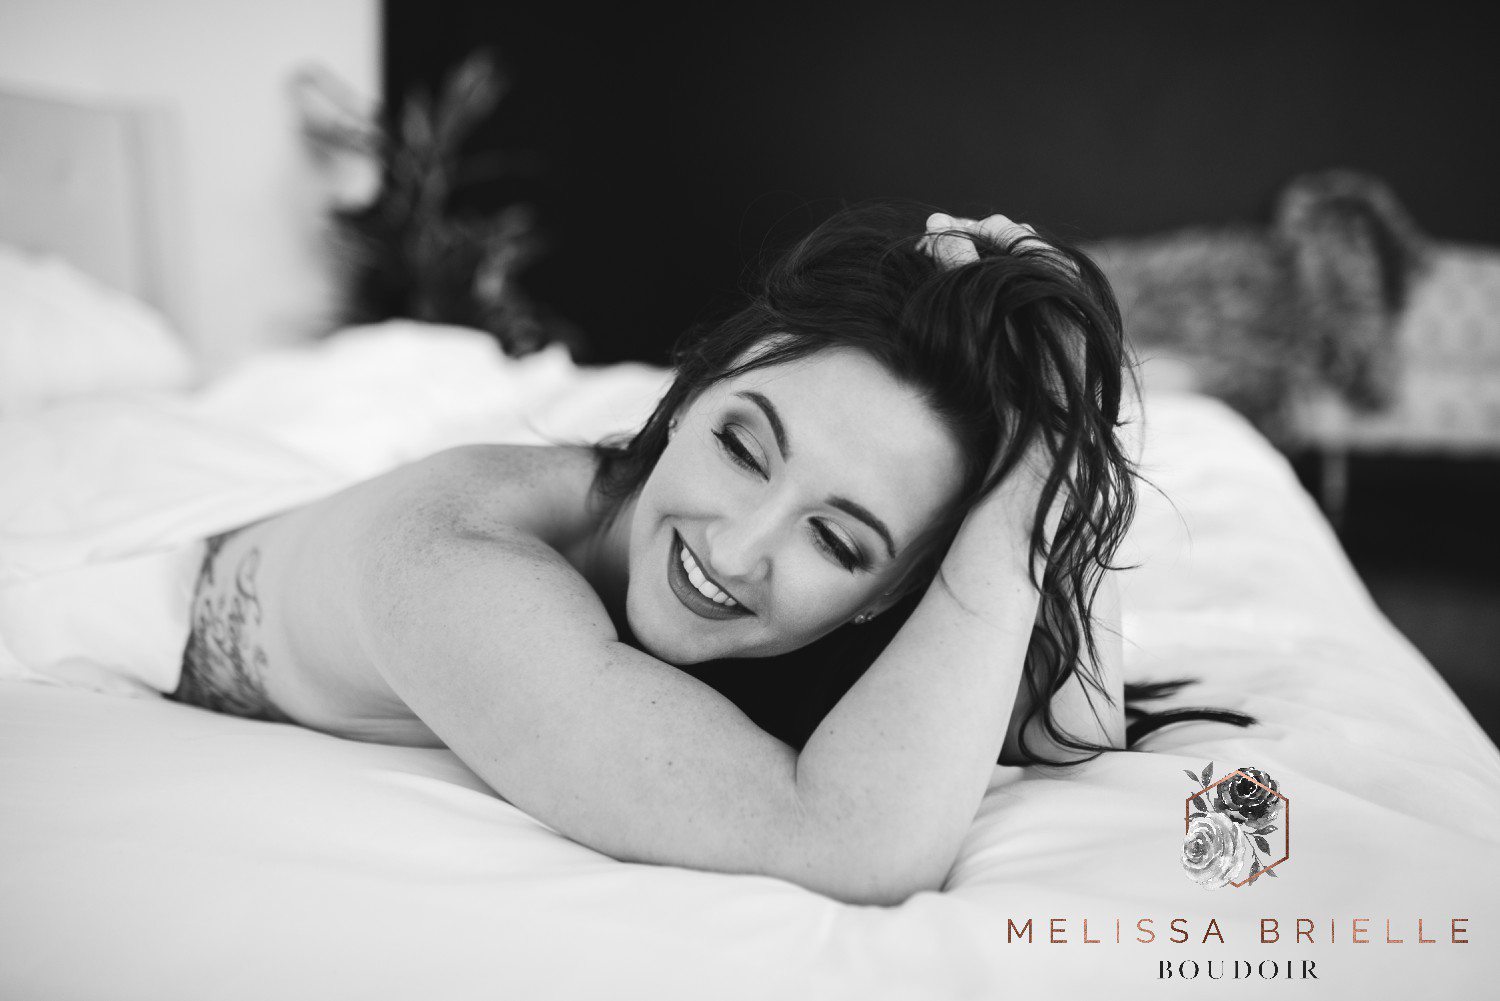 Reasons for a Boudoir Session